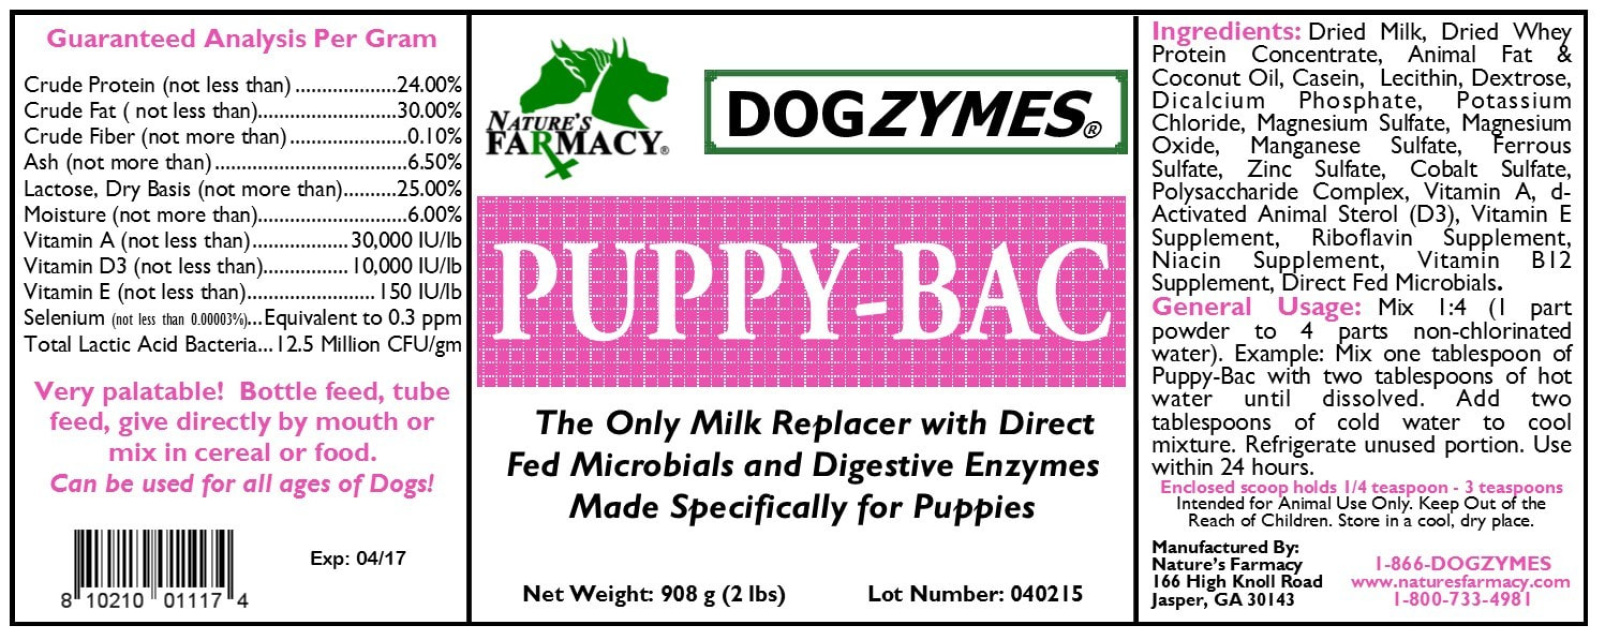 Dogzymes Puppy-Bac Milk Replacer Live Microorganisms –, 42% OFF